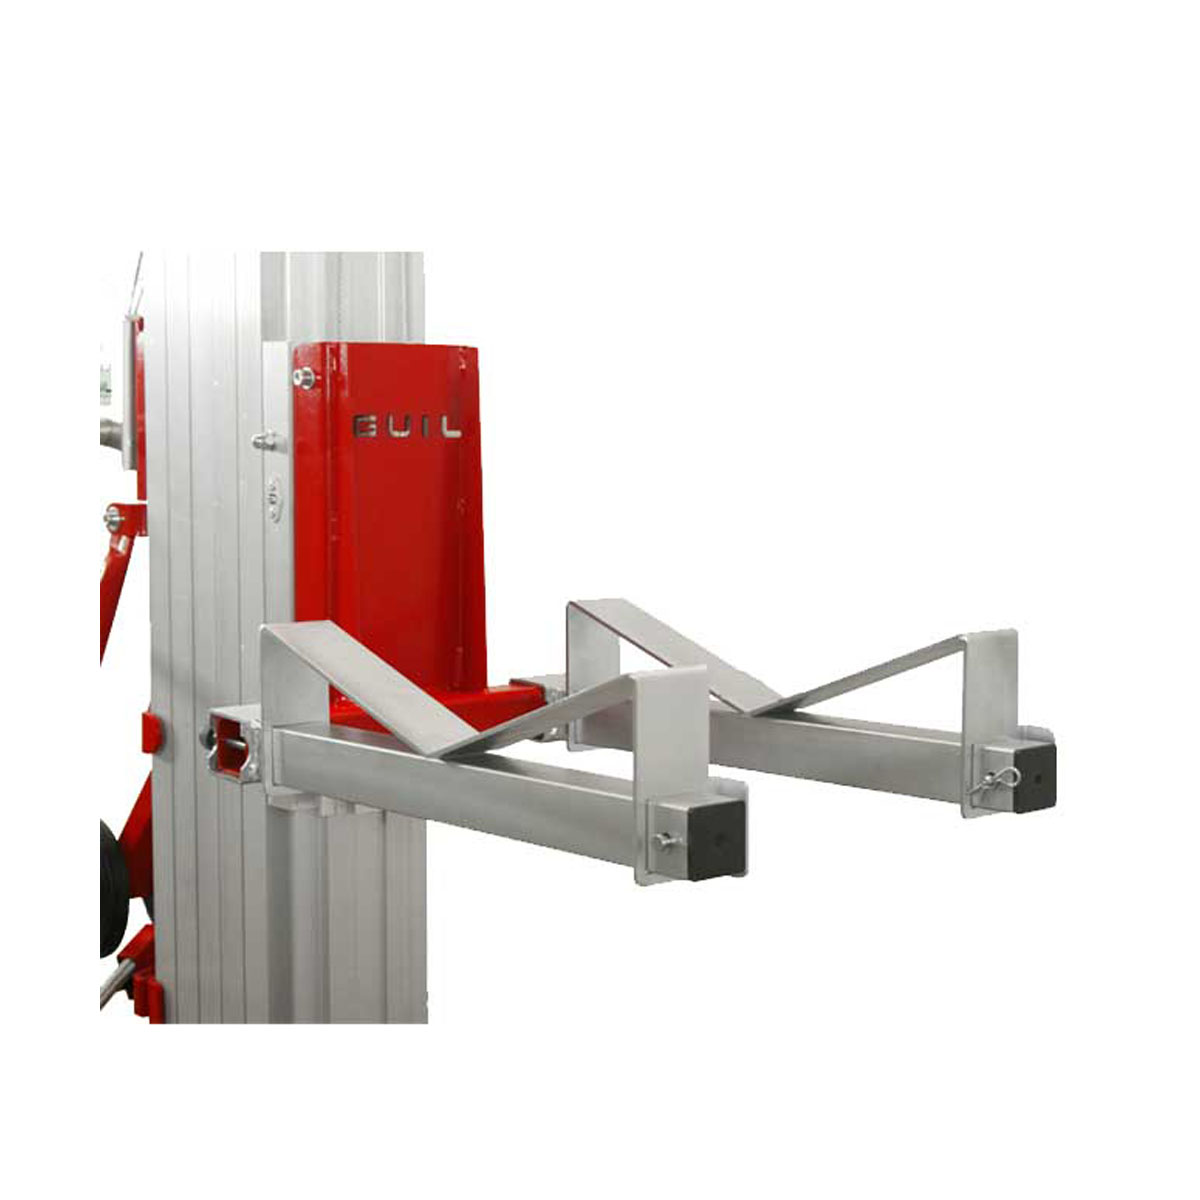 Buy Pipe Cradle Attachment for GUIL Utility Lift Equipment available at Astrolift NZ